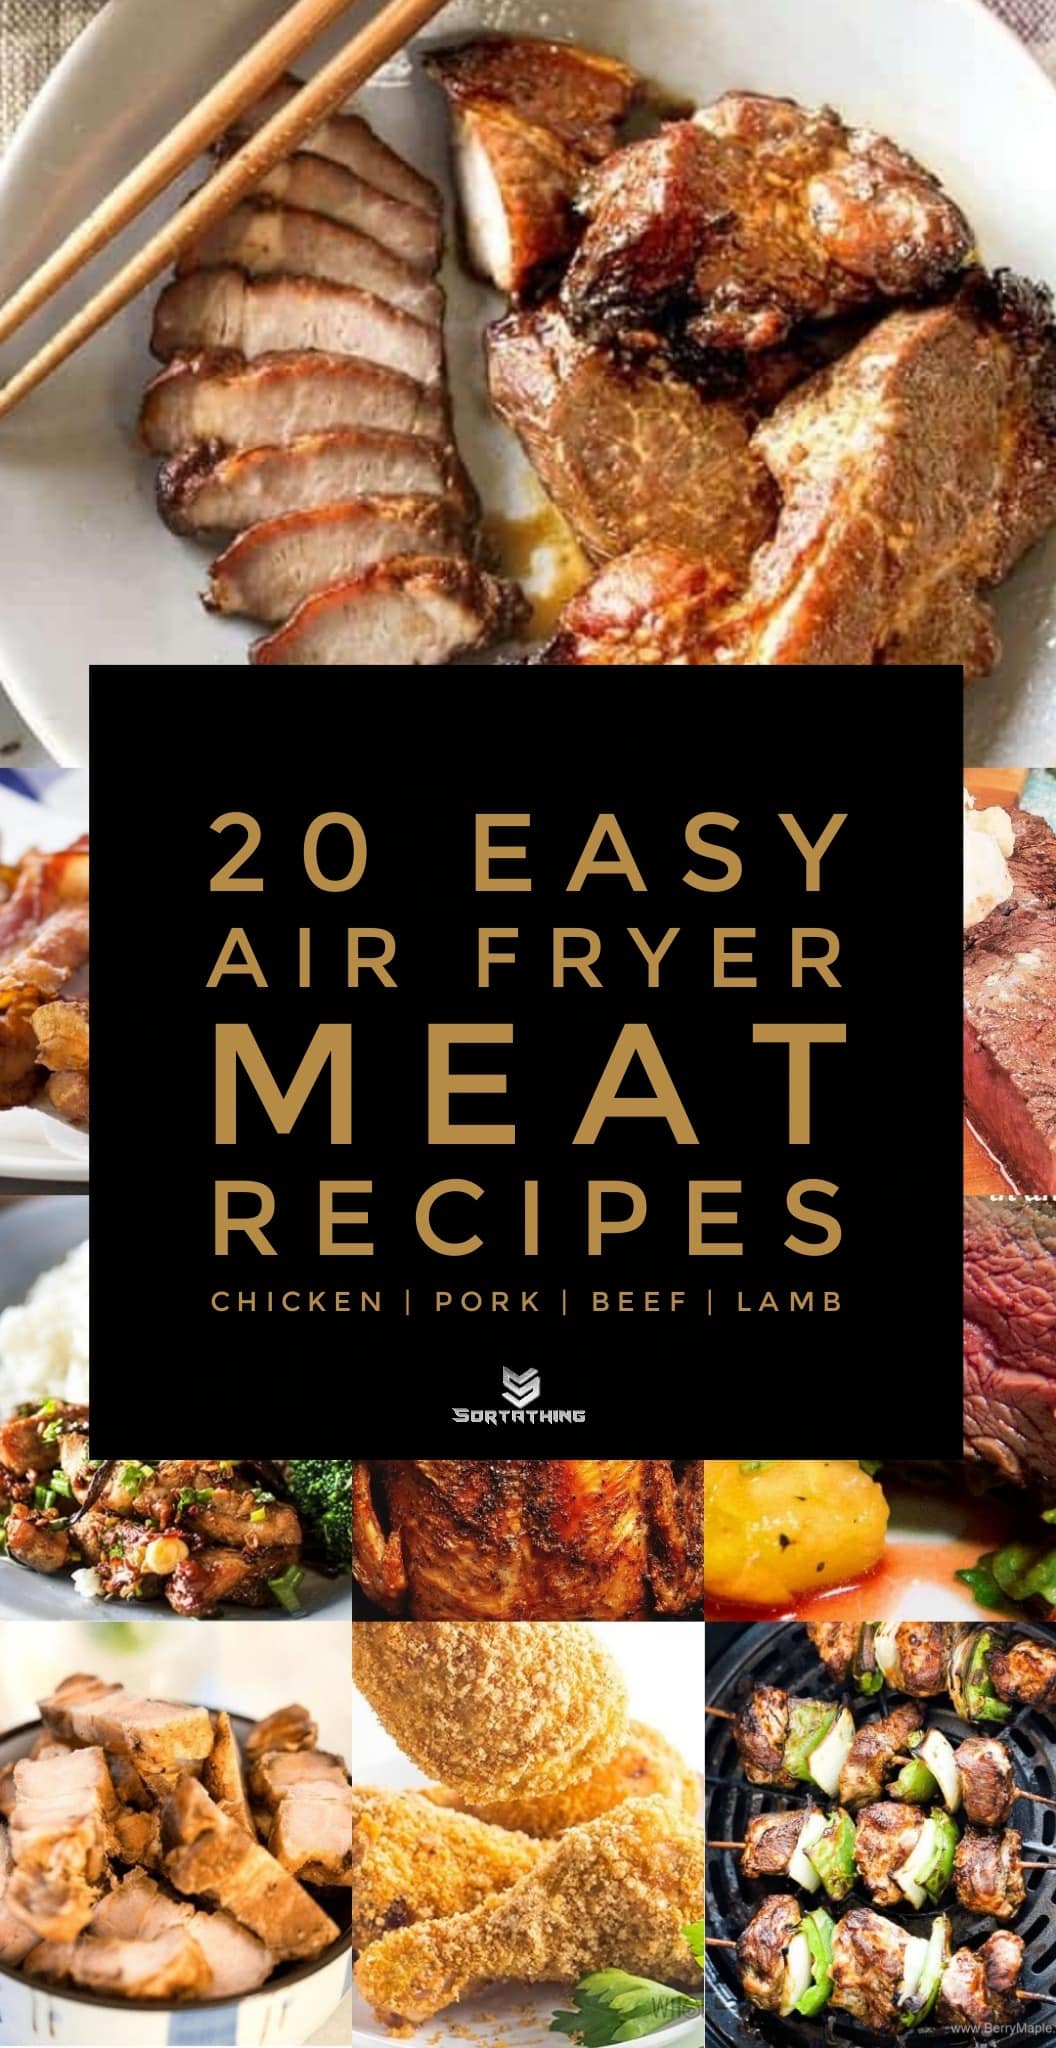 20 Easy Air Fryer Meat Recipes for Chicken, Pork, Beef & Lamb